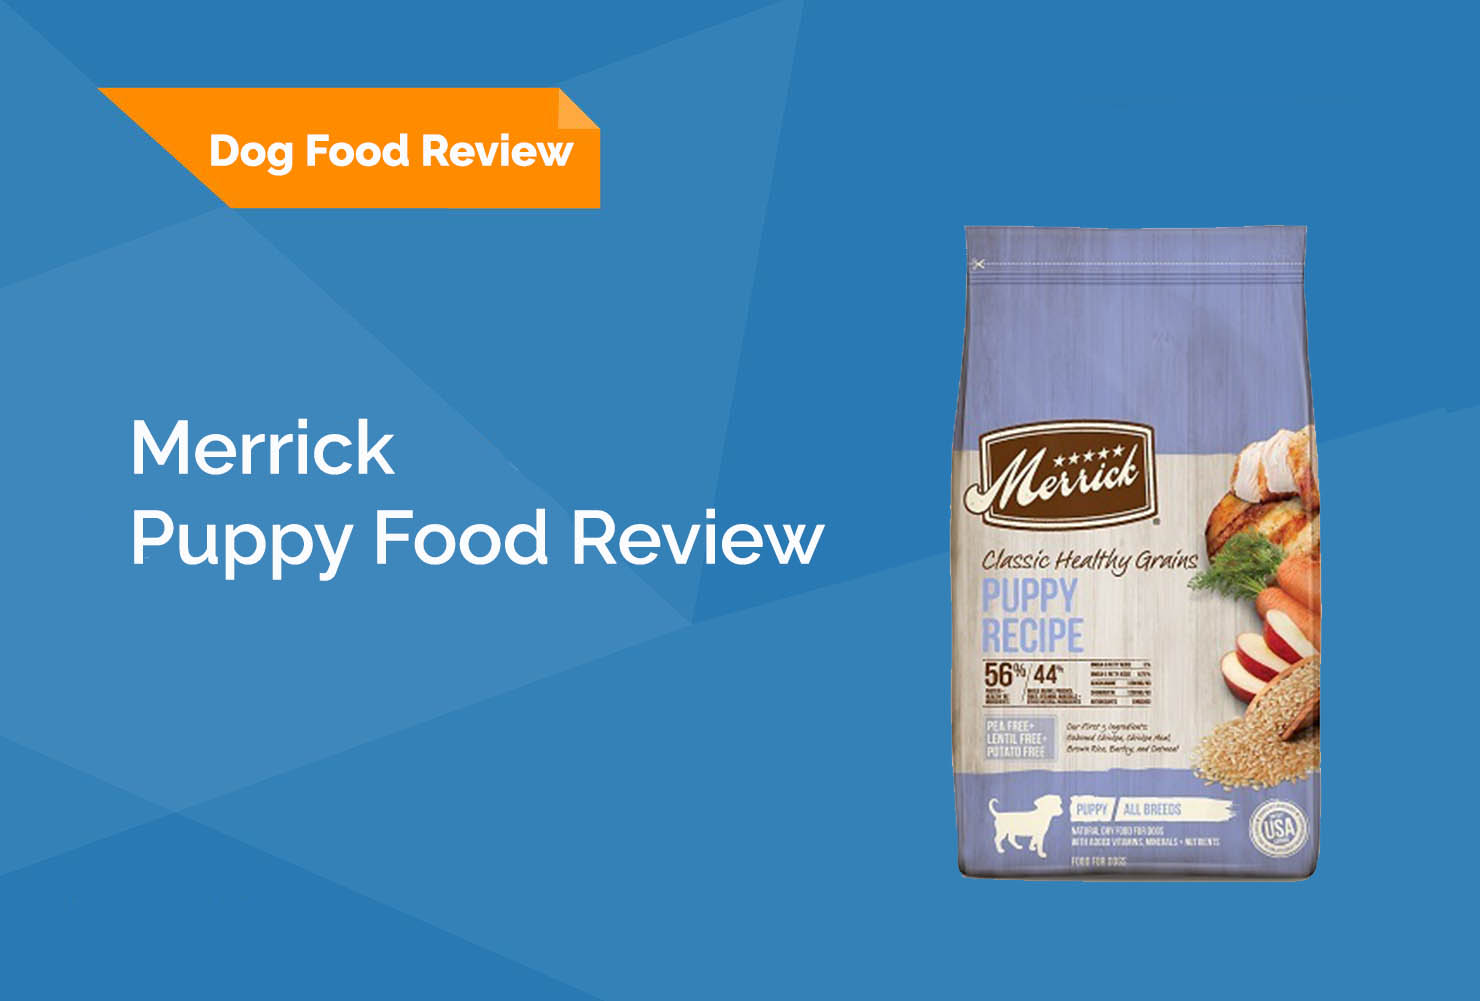 Merrick puppy food review